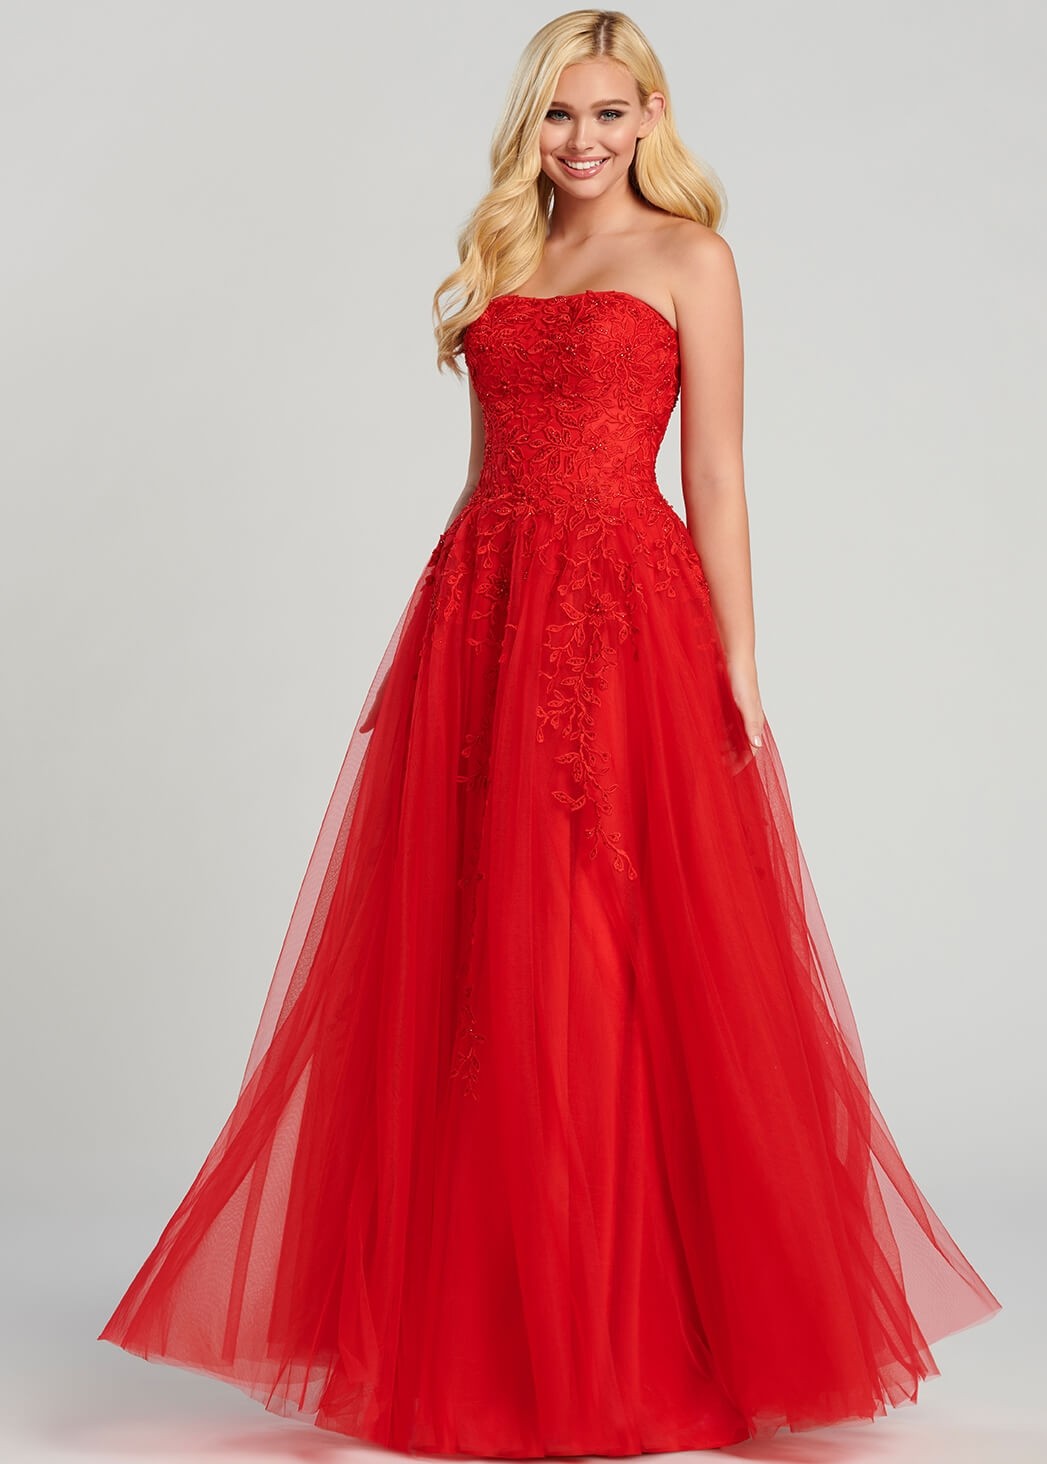 Ellie Wilde EW120116 Strapless Embroidered Tulle Ball Gown